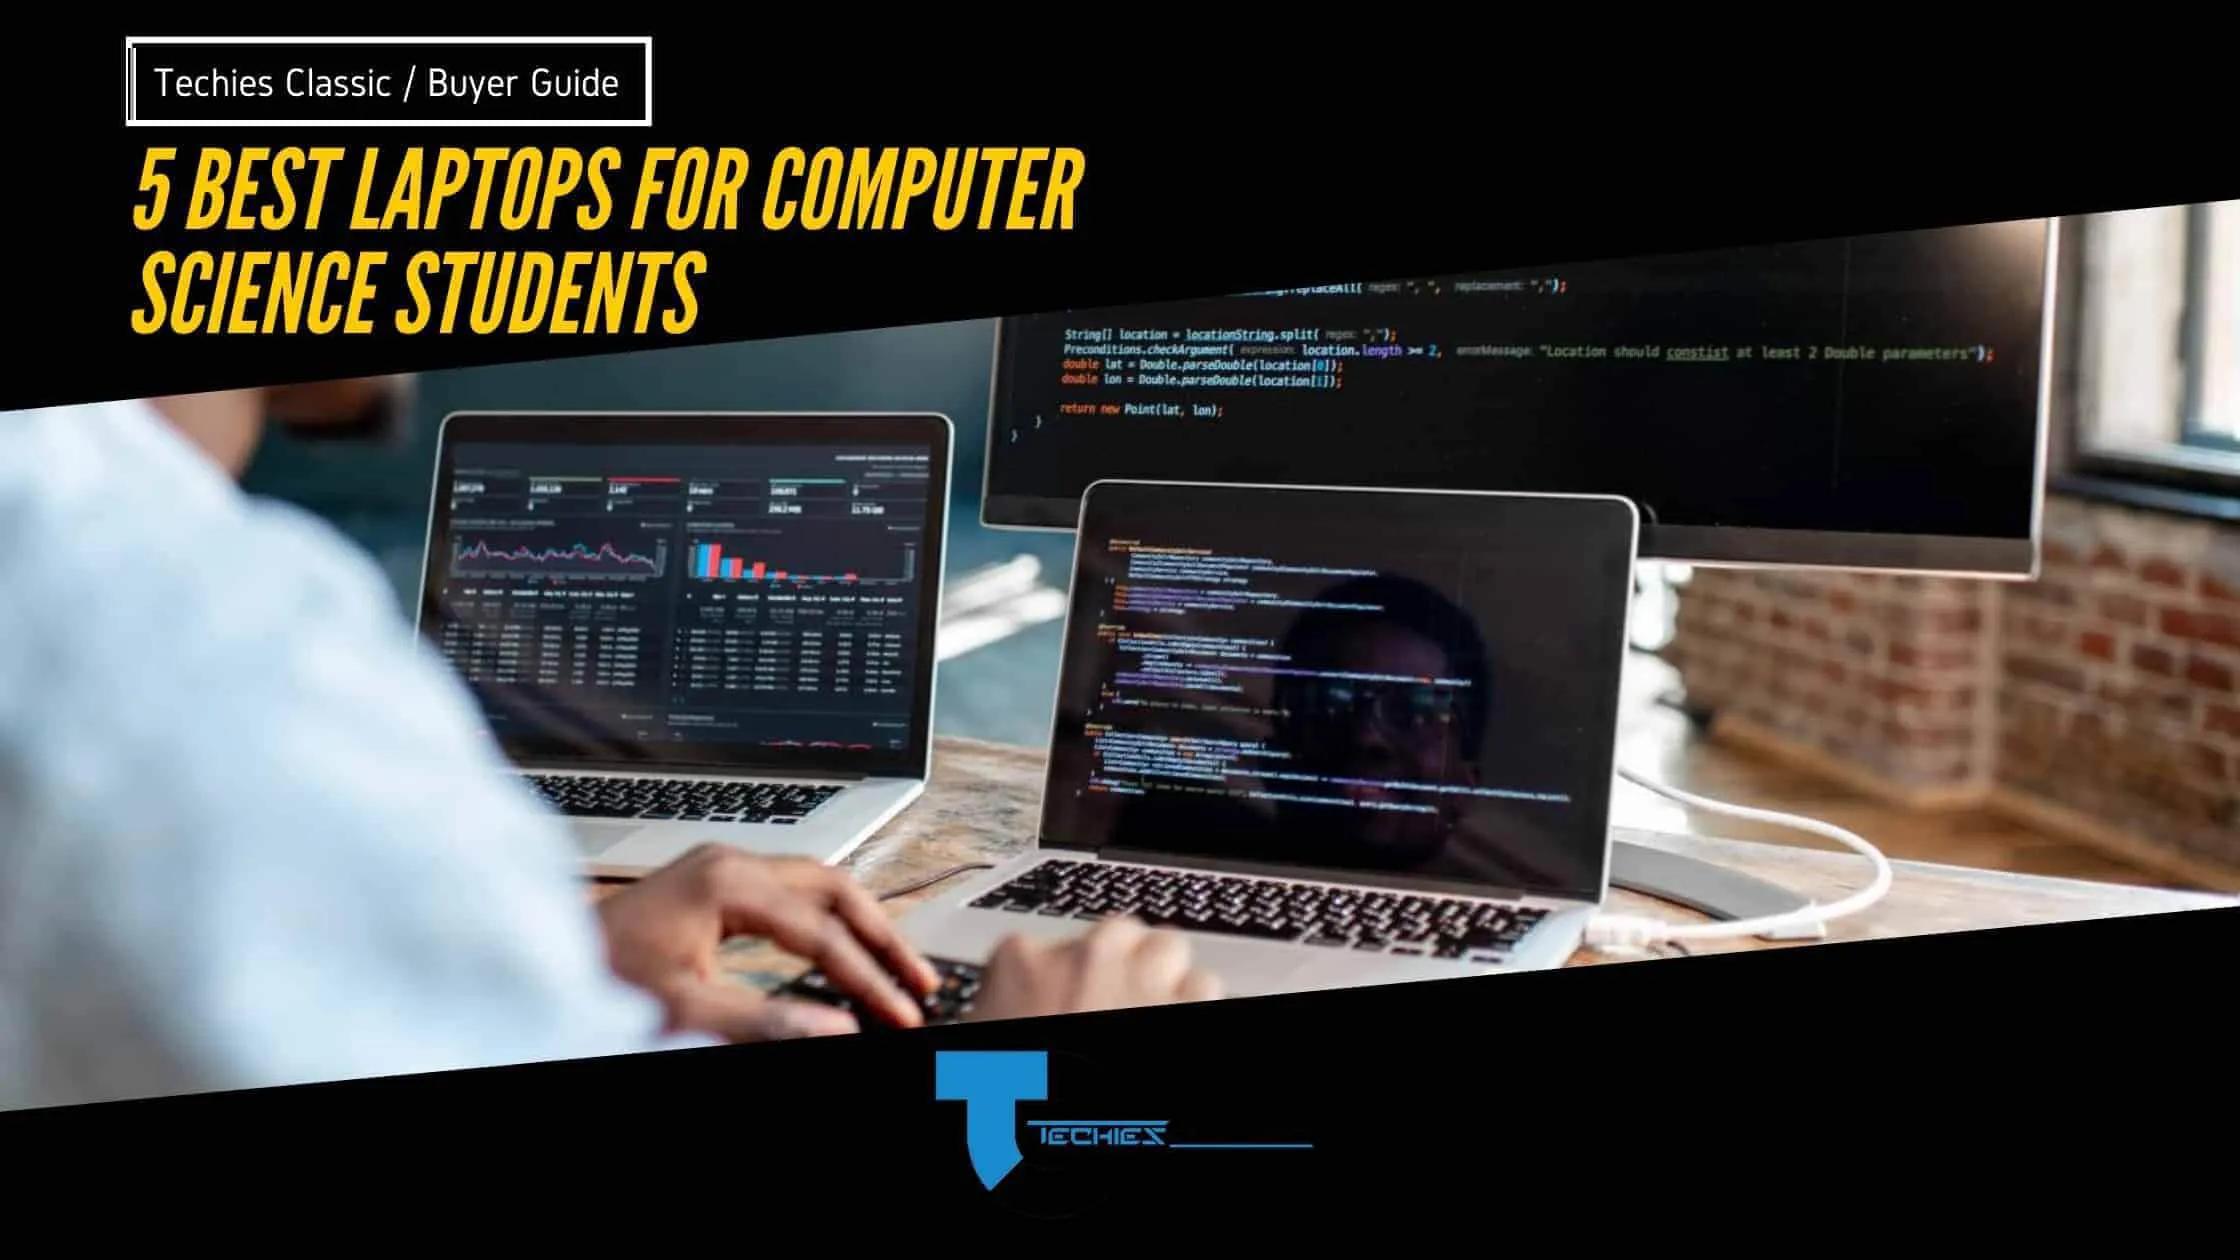 The best laptops for computer science Students: Buyers Guide